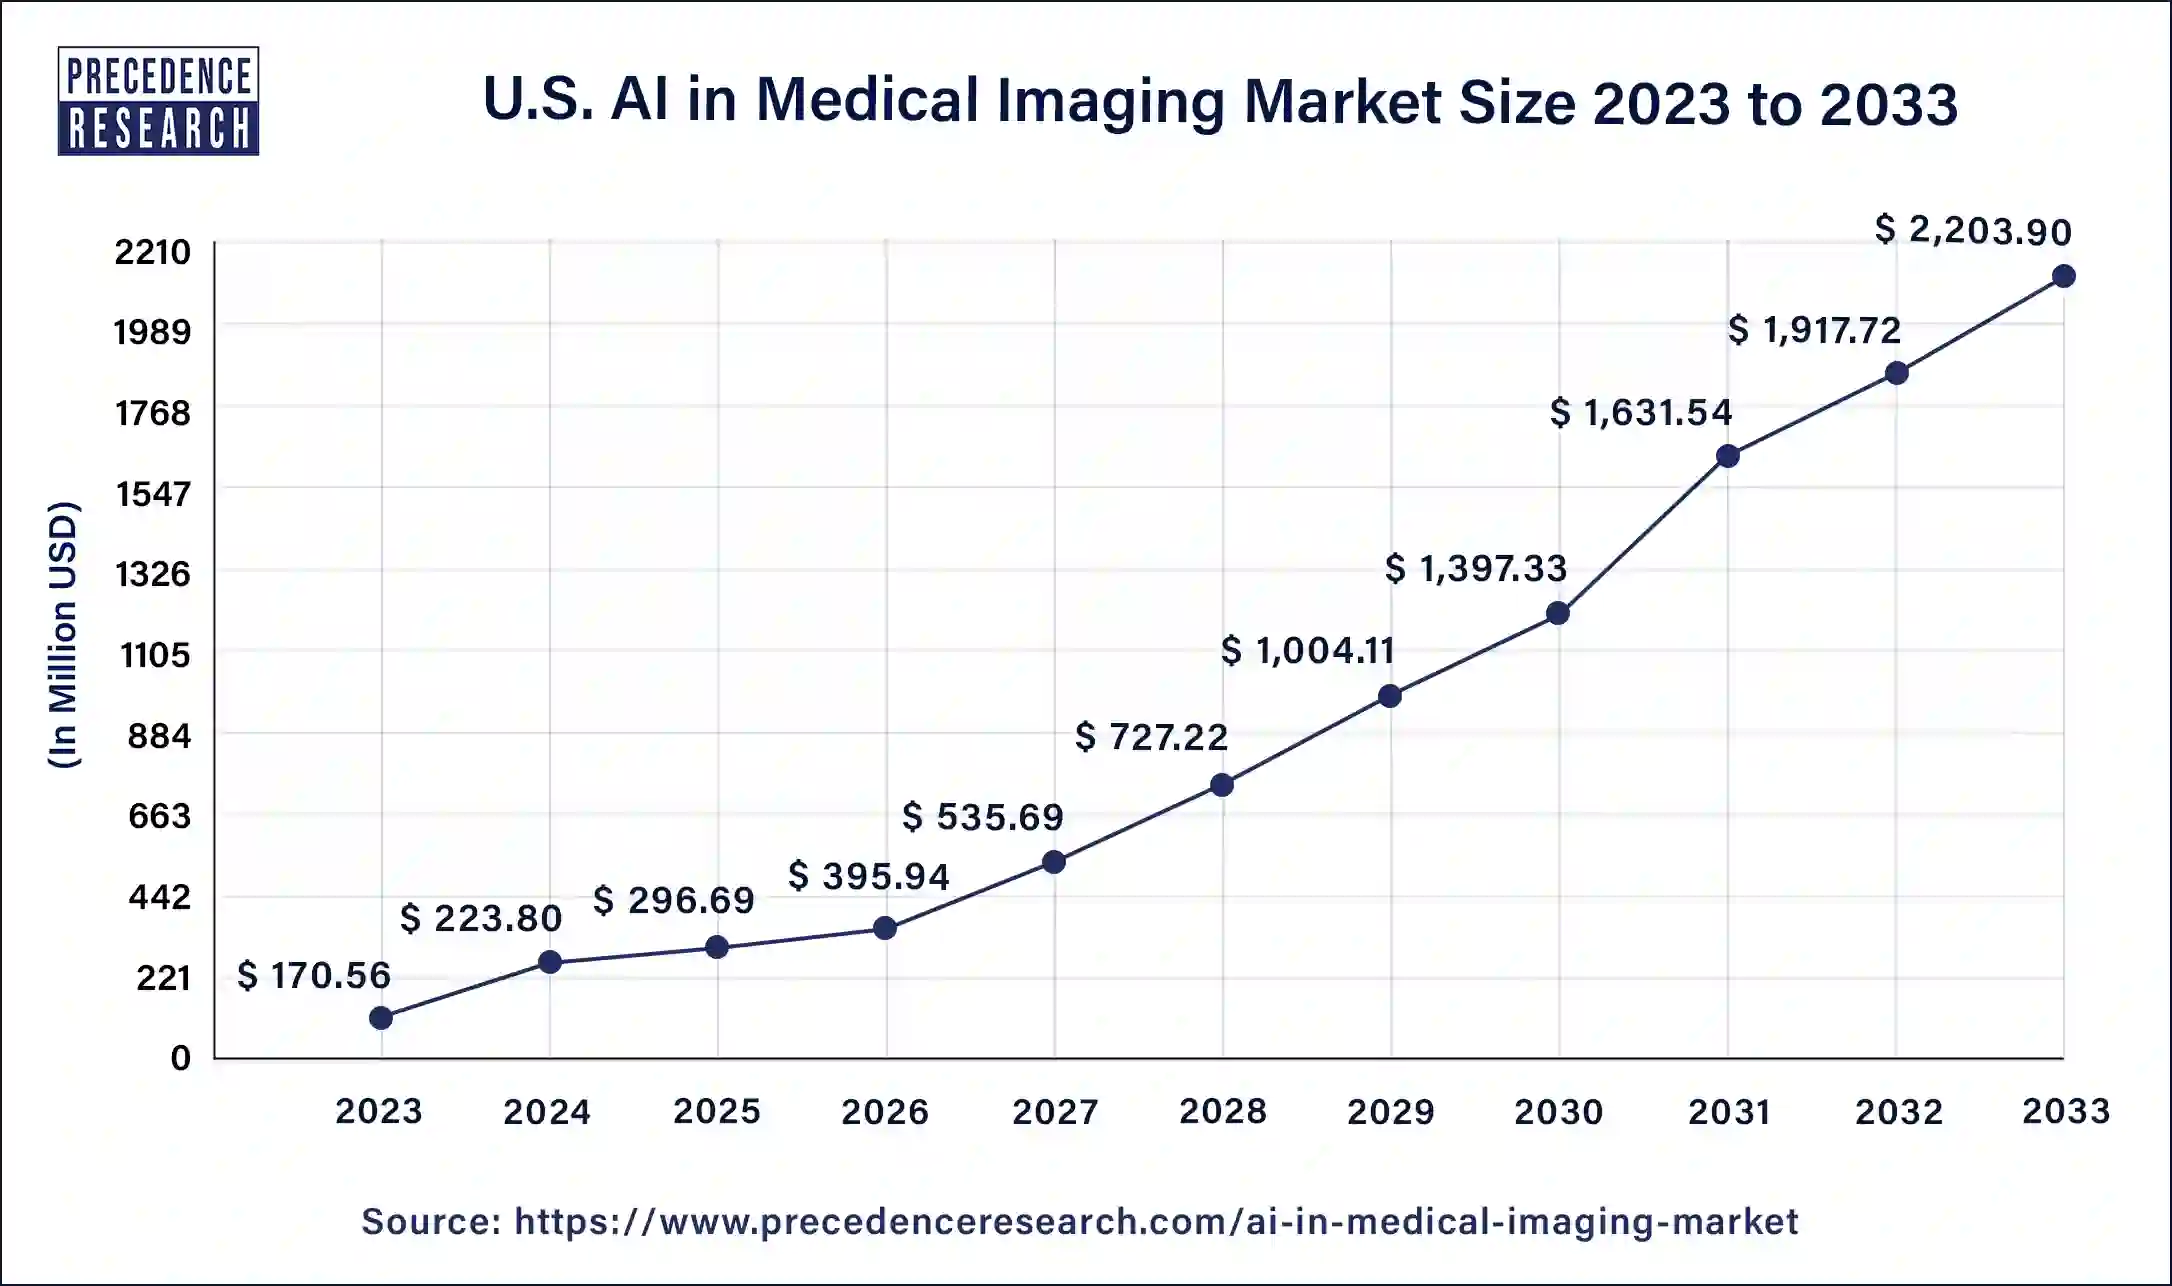 U.S. AI in Medical Imaging Market Size 2024 To 2033